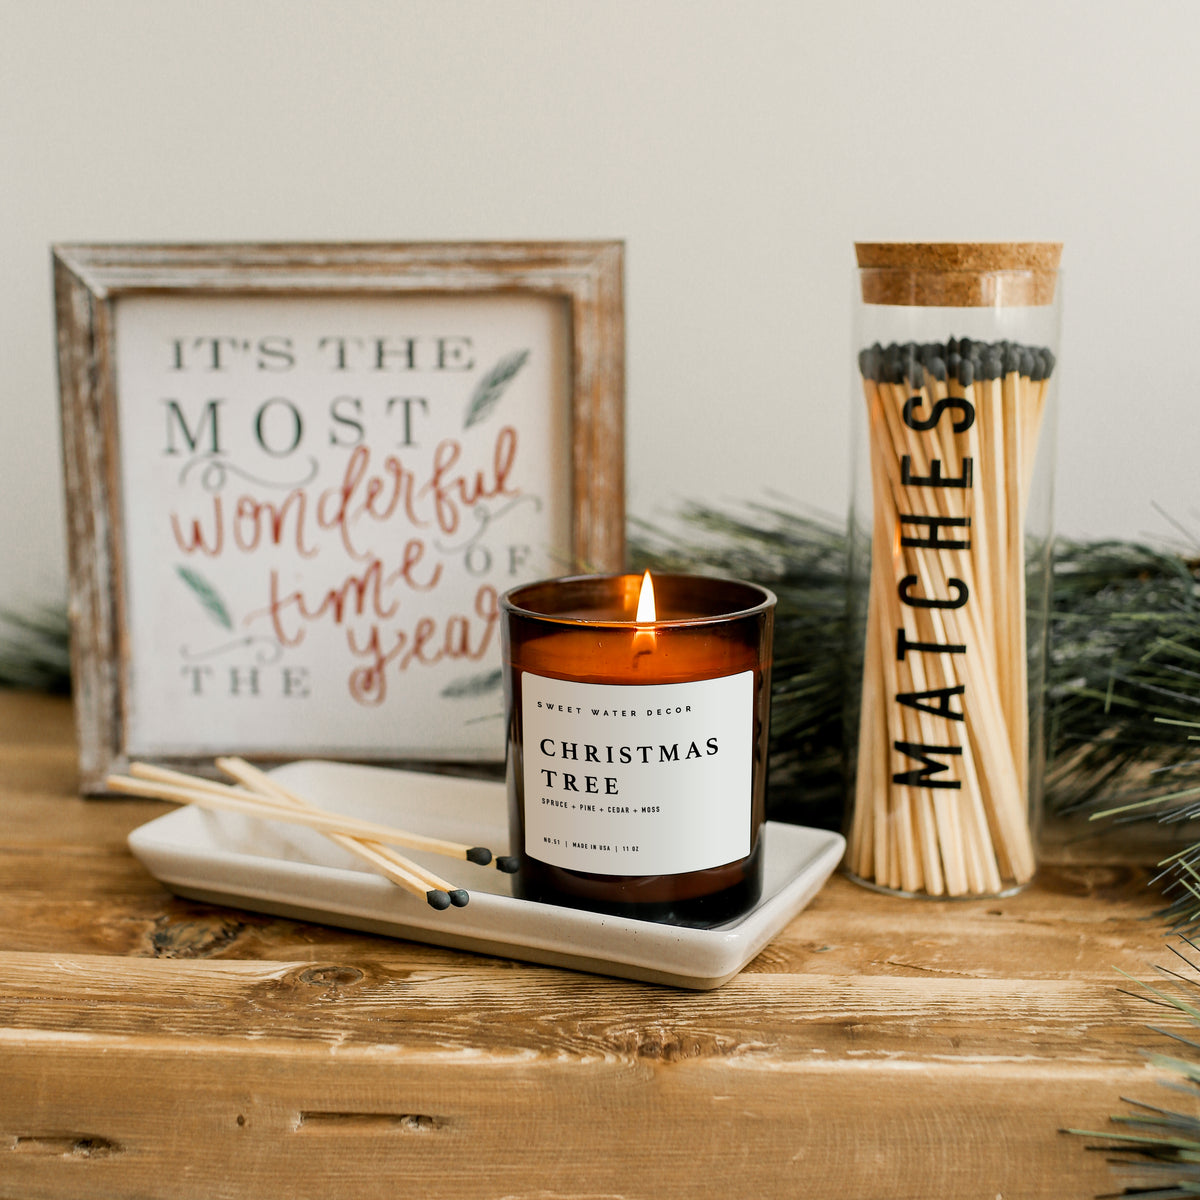 Sweet Water Candle Co. Christmas Tree Soy Candle | 11oz Hand Made